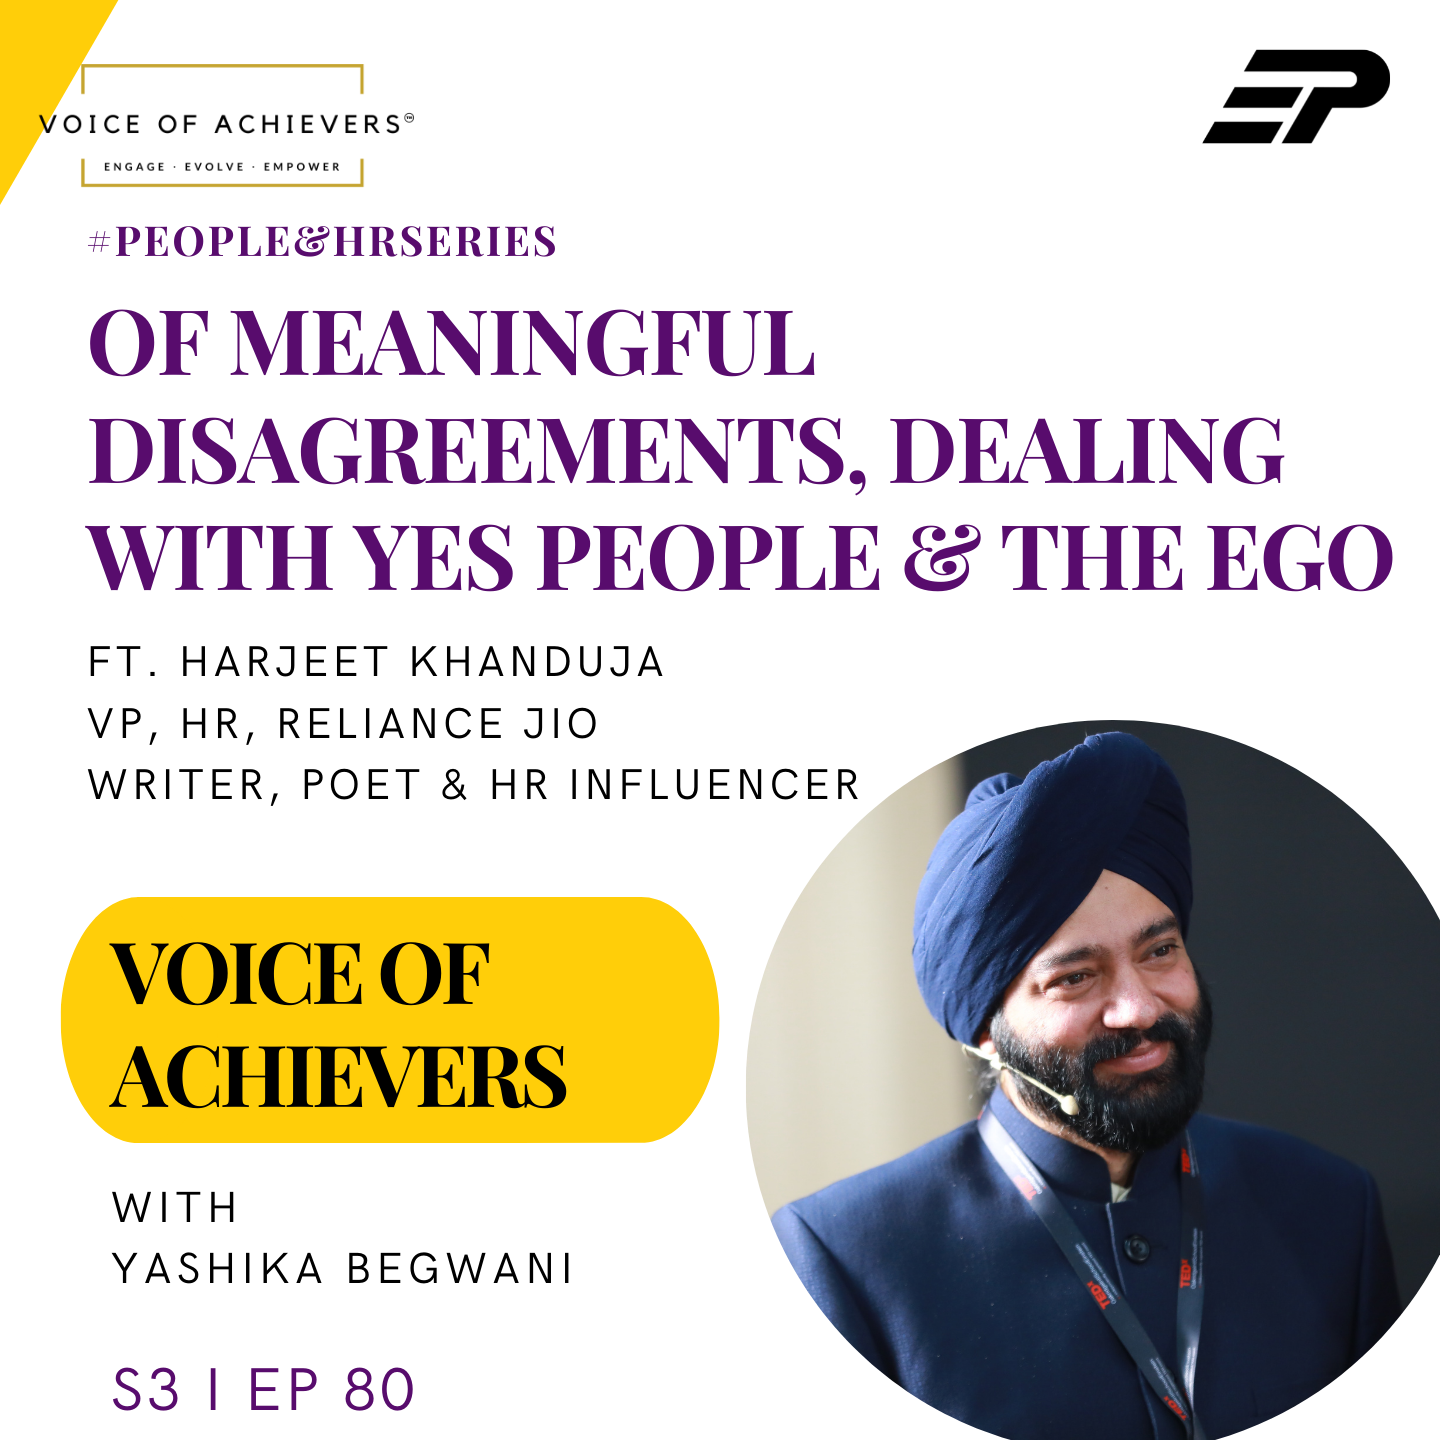 Of Meaningful Disagreements, Dealing with Yes People & The Ego Ft. Harjeet Khanduja